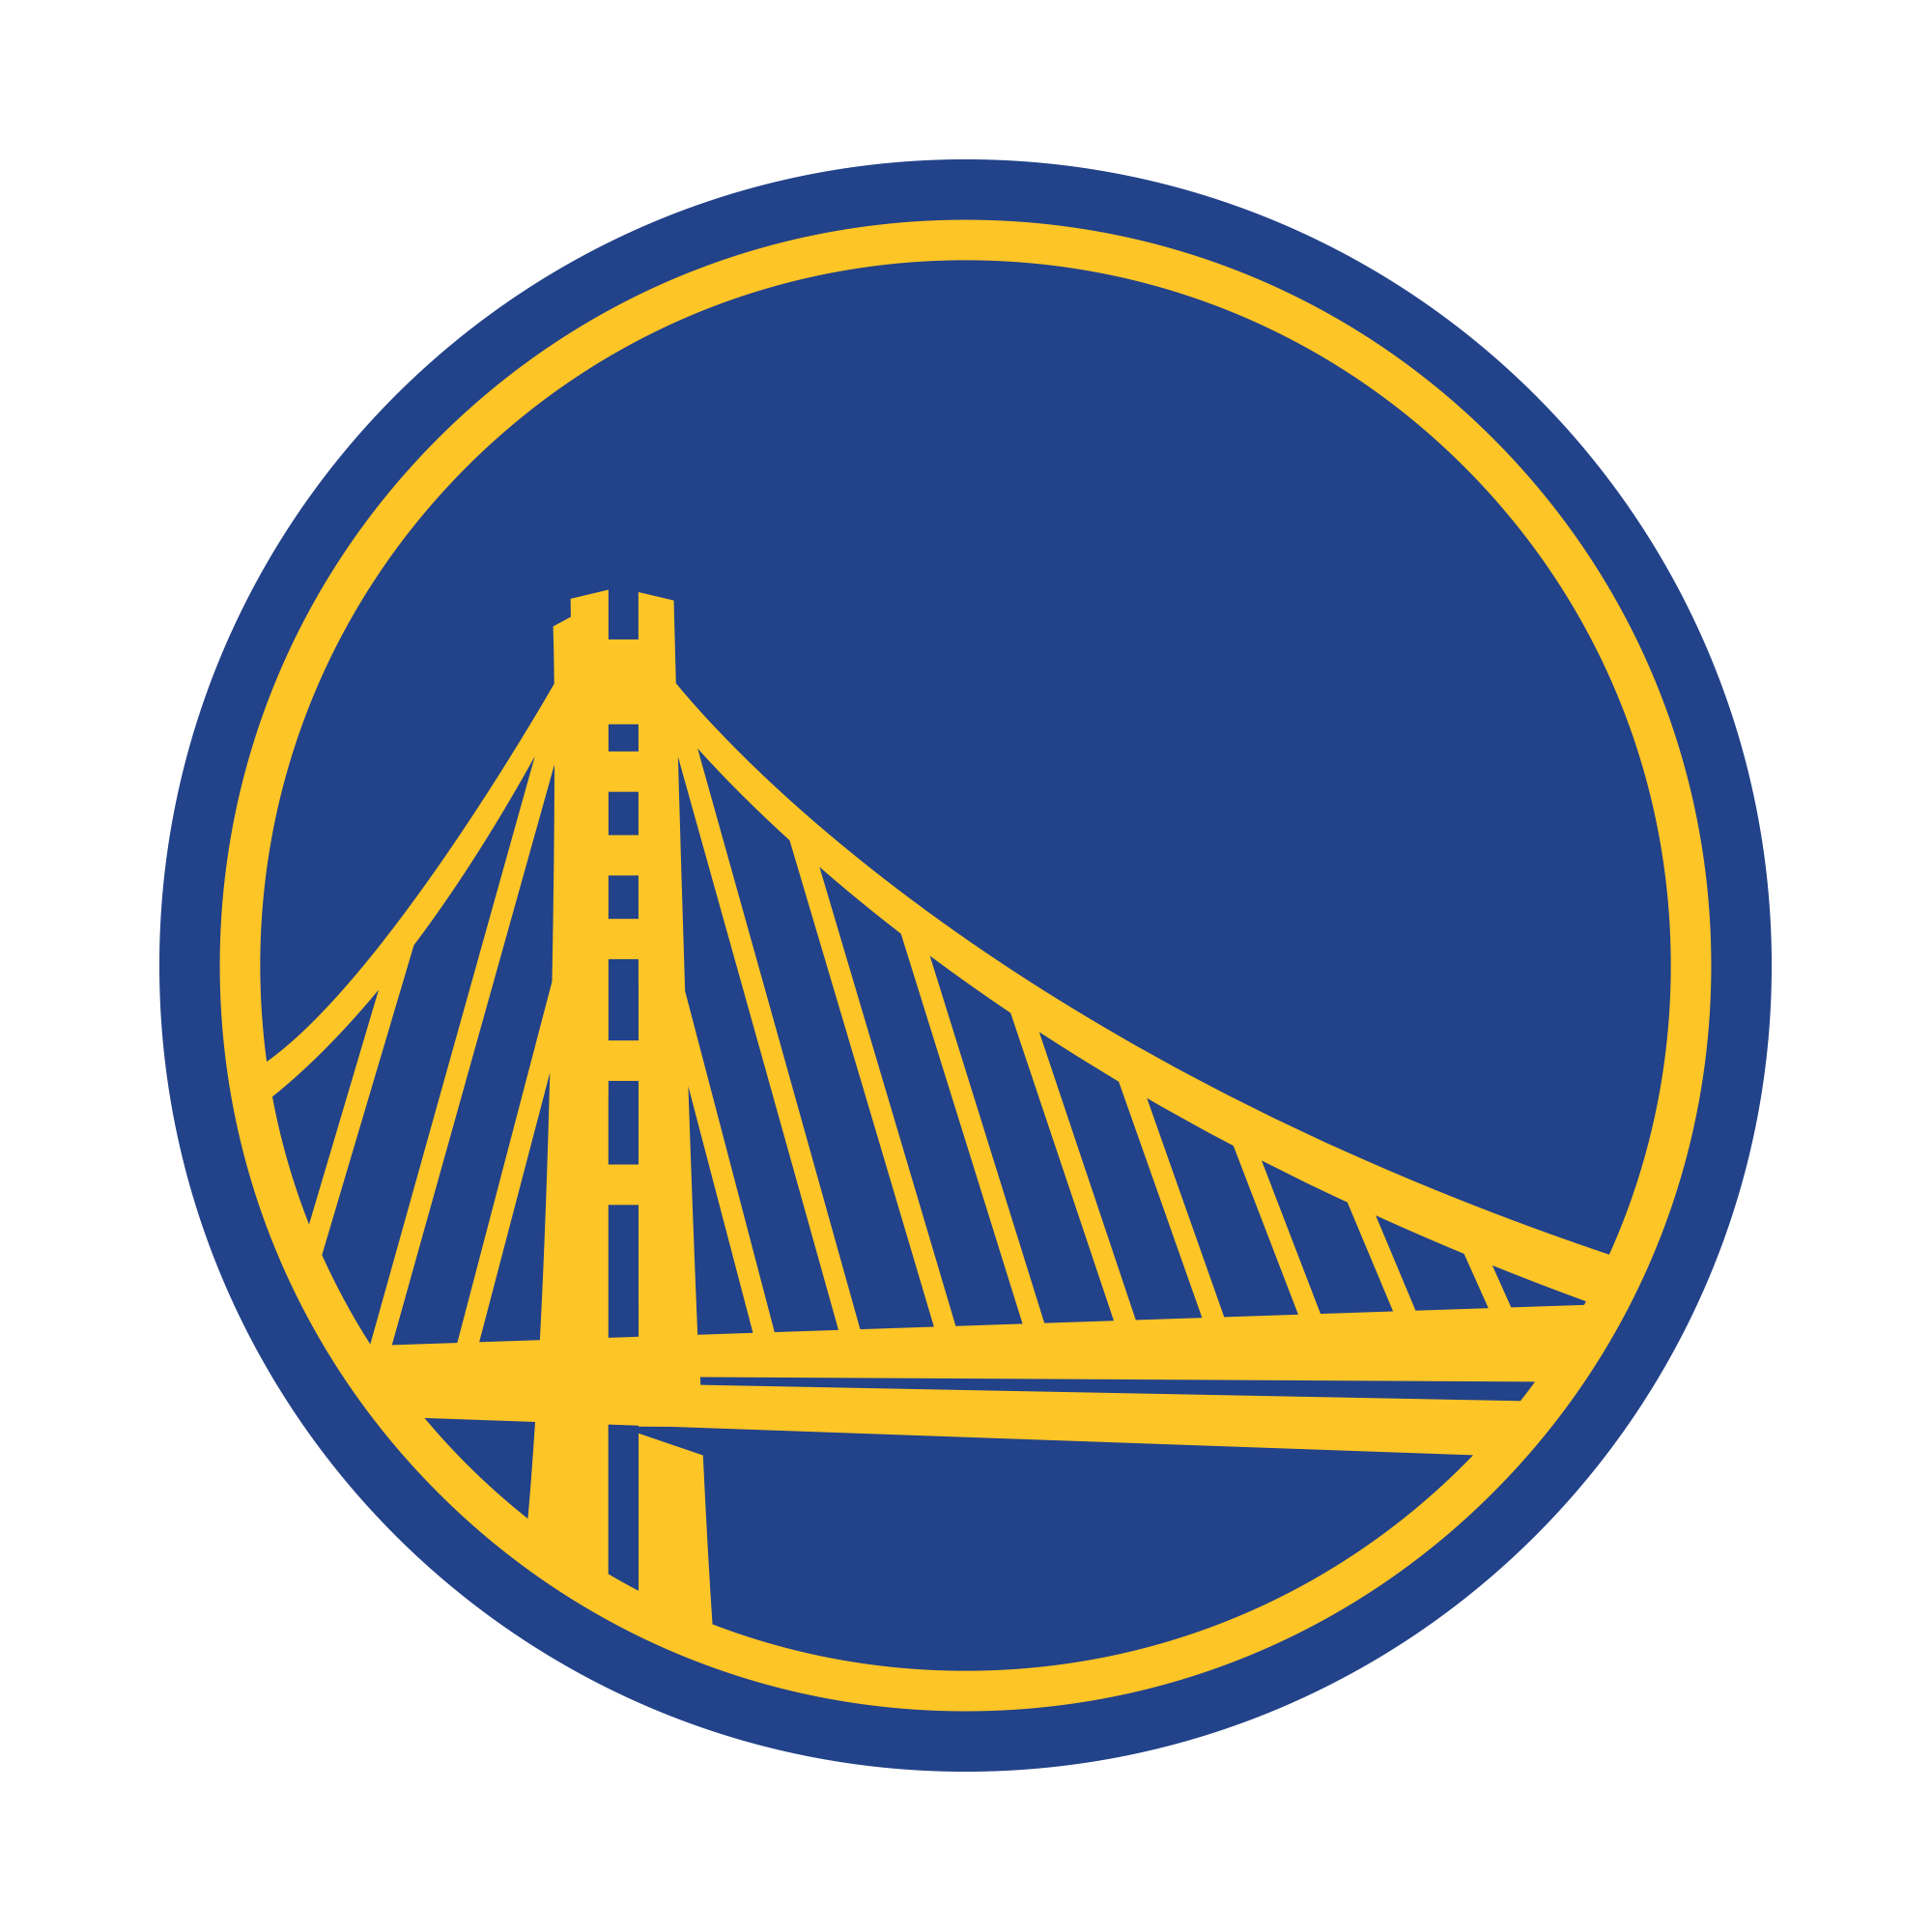 Team Selection: Golden State Warriors